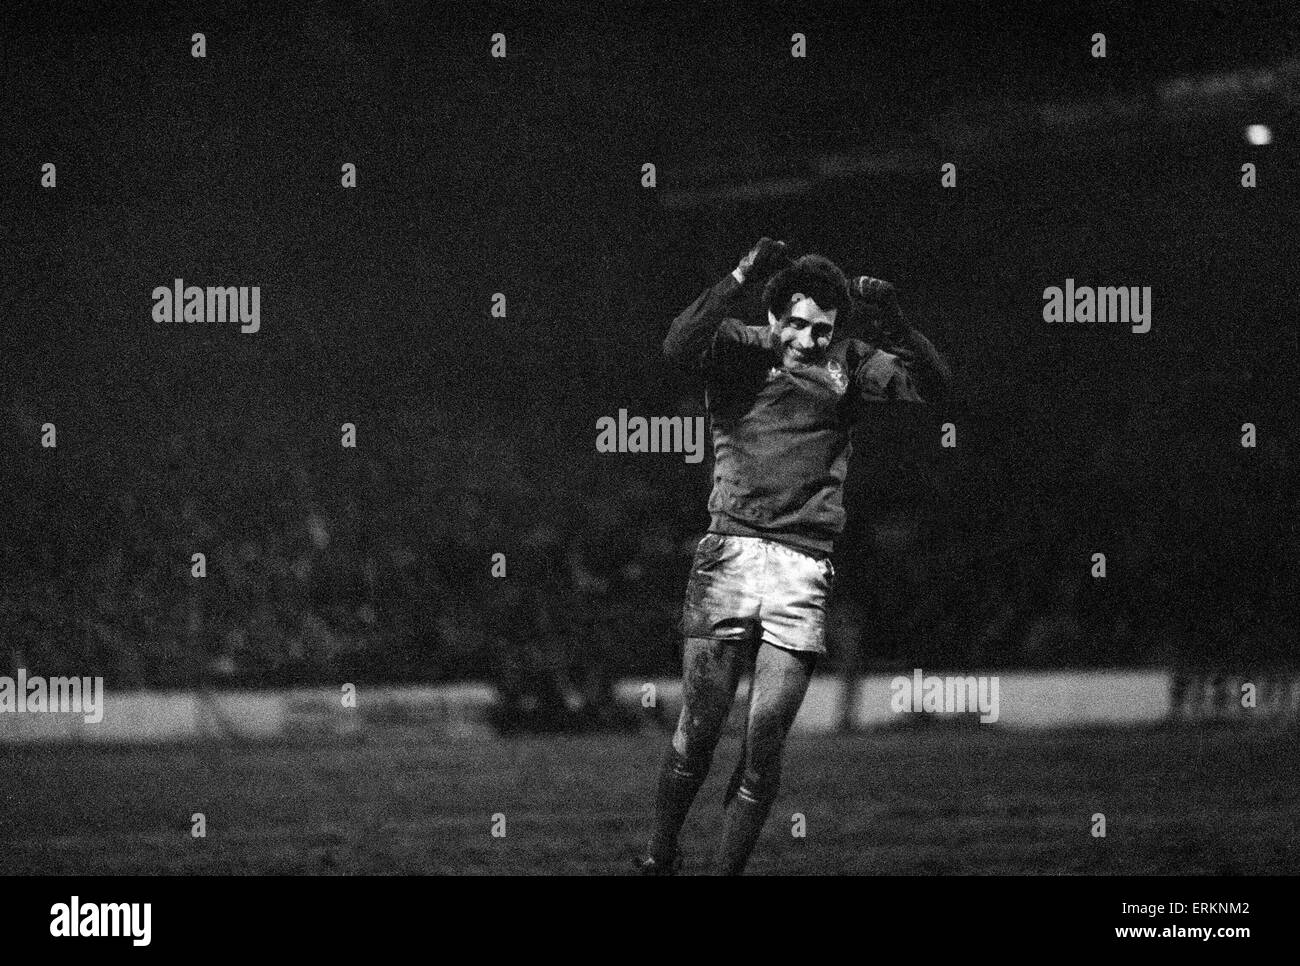 League Cup Semi Final First Leg match at the City Ground.  Nottingham Forest 1 v Liverpool 0. Joy for goalkeeper Peter Shilton as Forest take the lead. 22nd January 1980. Stock Photo